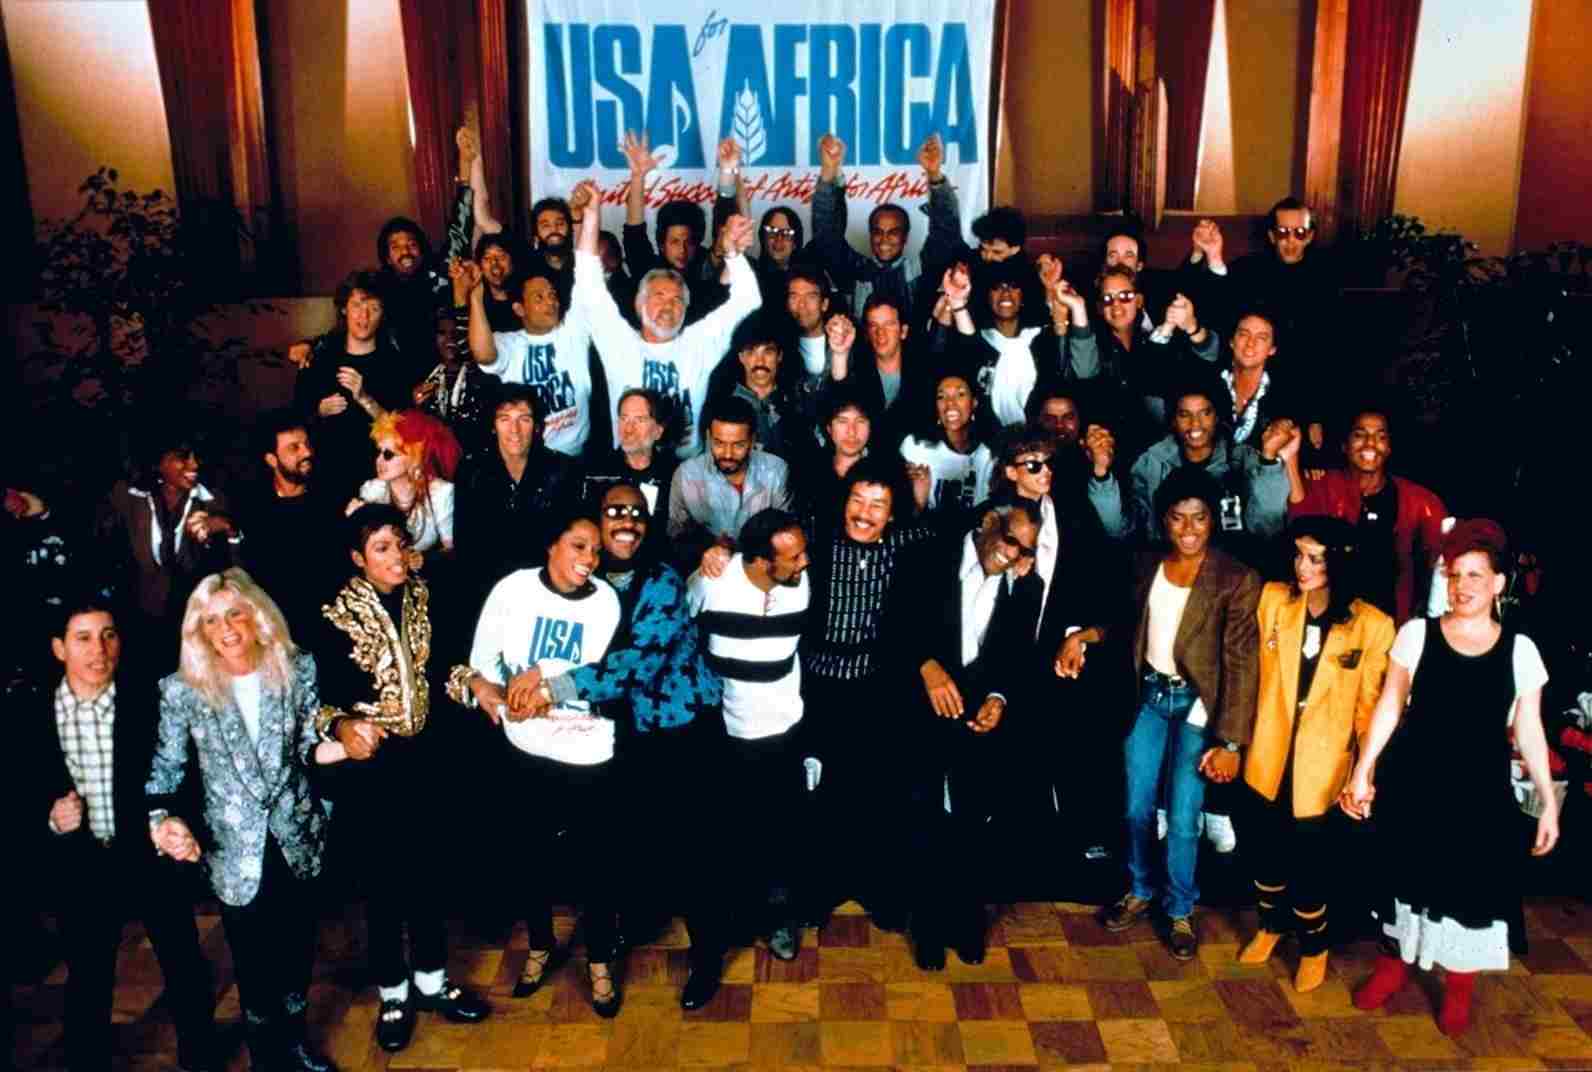 'We Are The World' completa 35 anos música USA For Africa